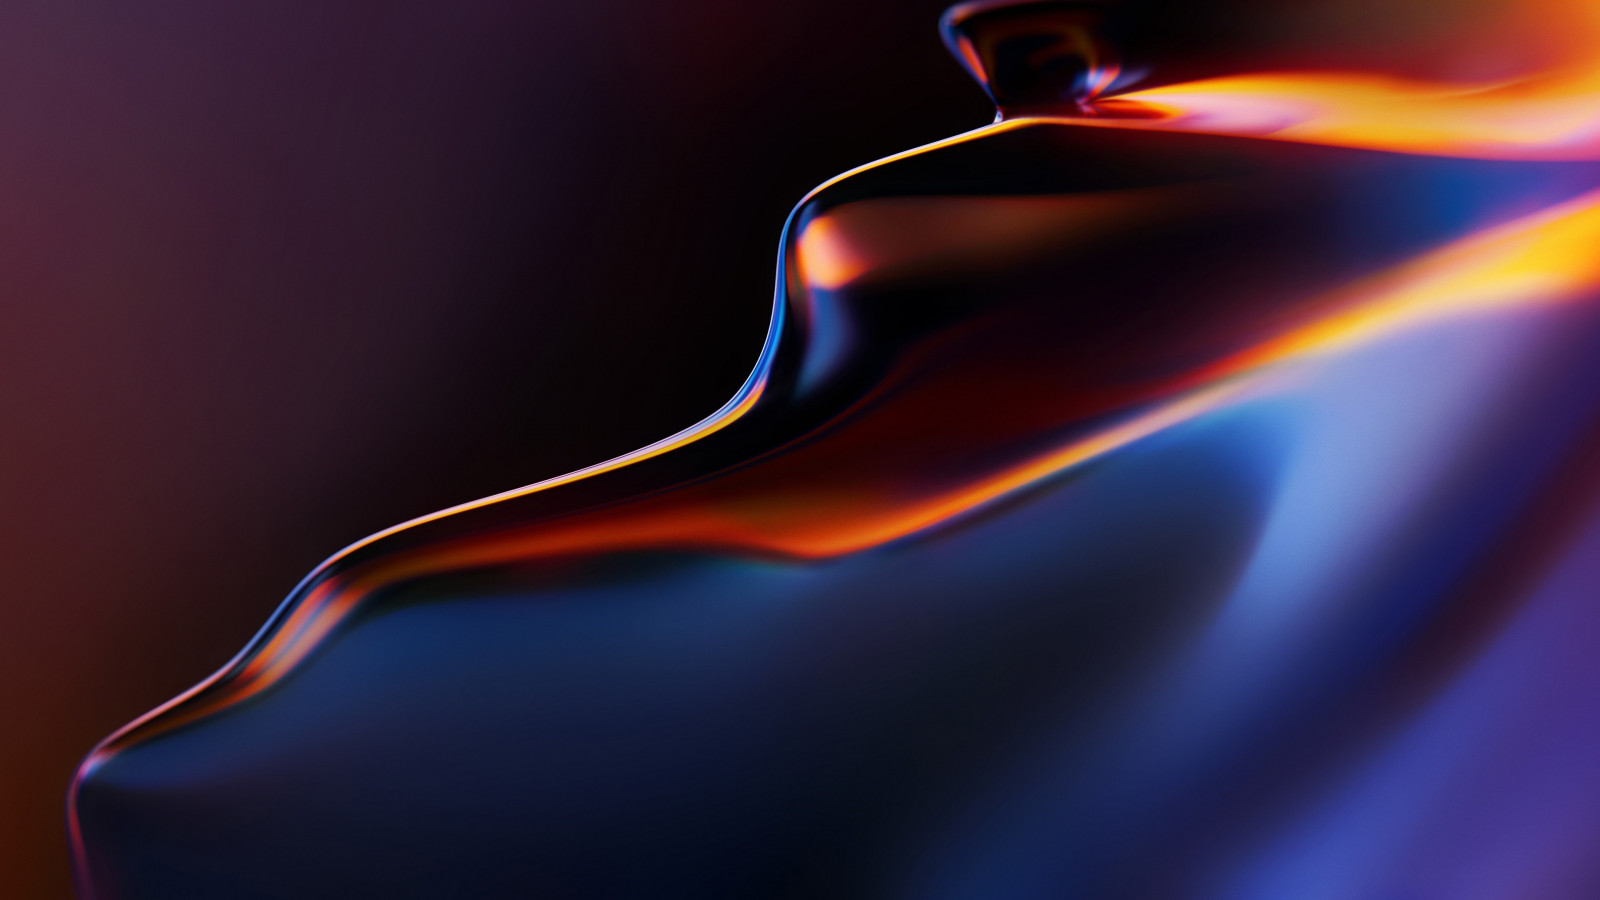 Abstract, flow, OnePlus 6T wallpaper 1600x900